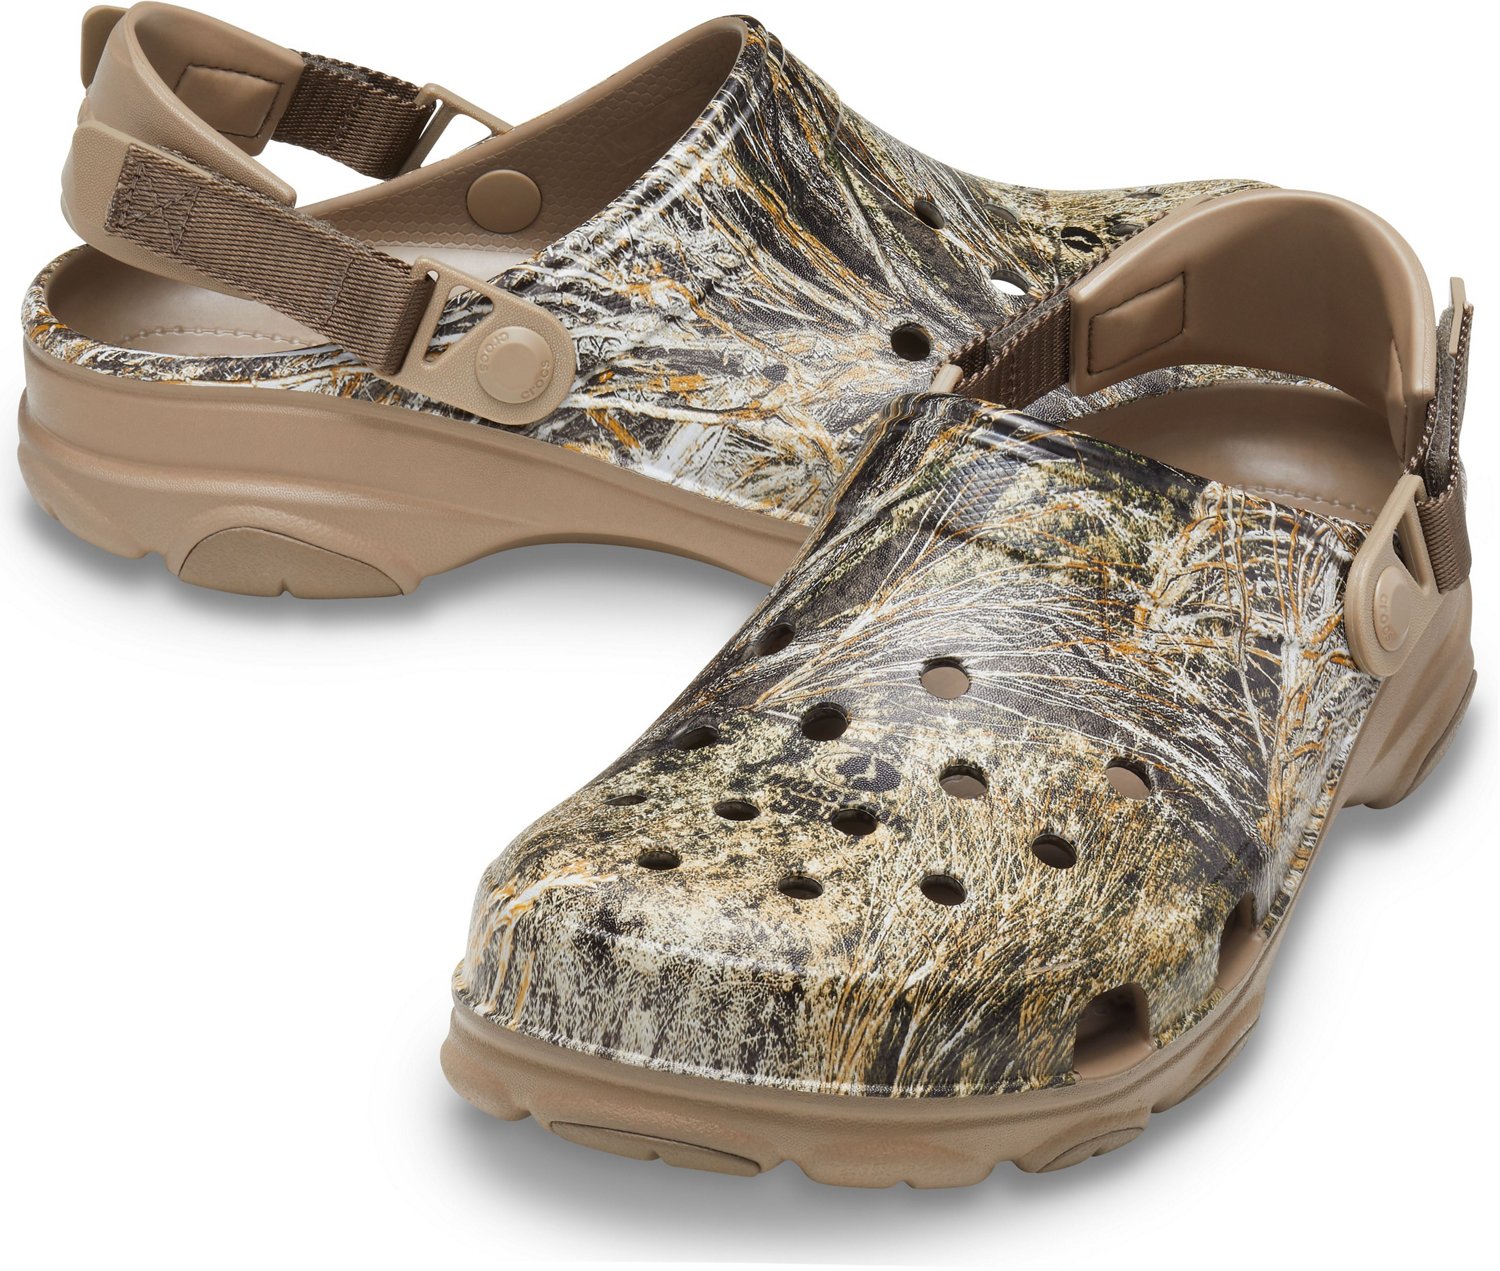 CROCS MOSSY OAK FISHING ONES. Ross find. Whats the big deal about cro